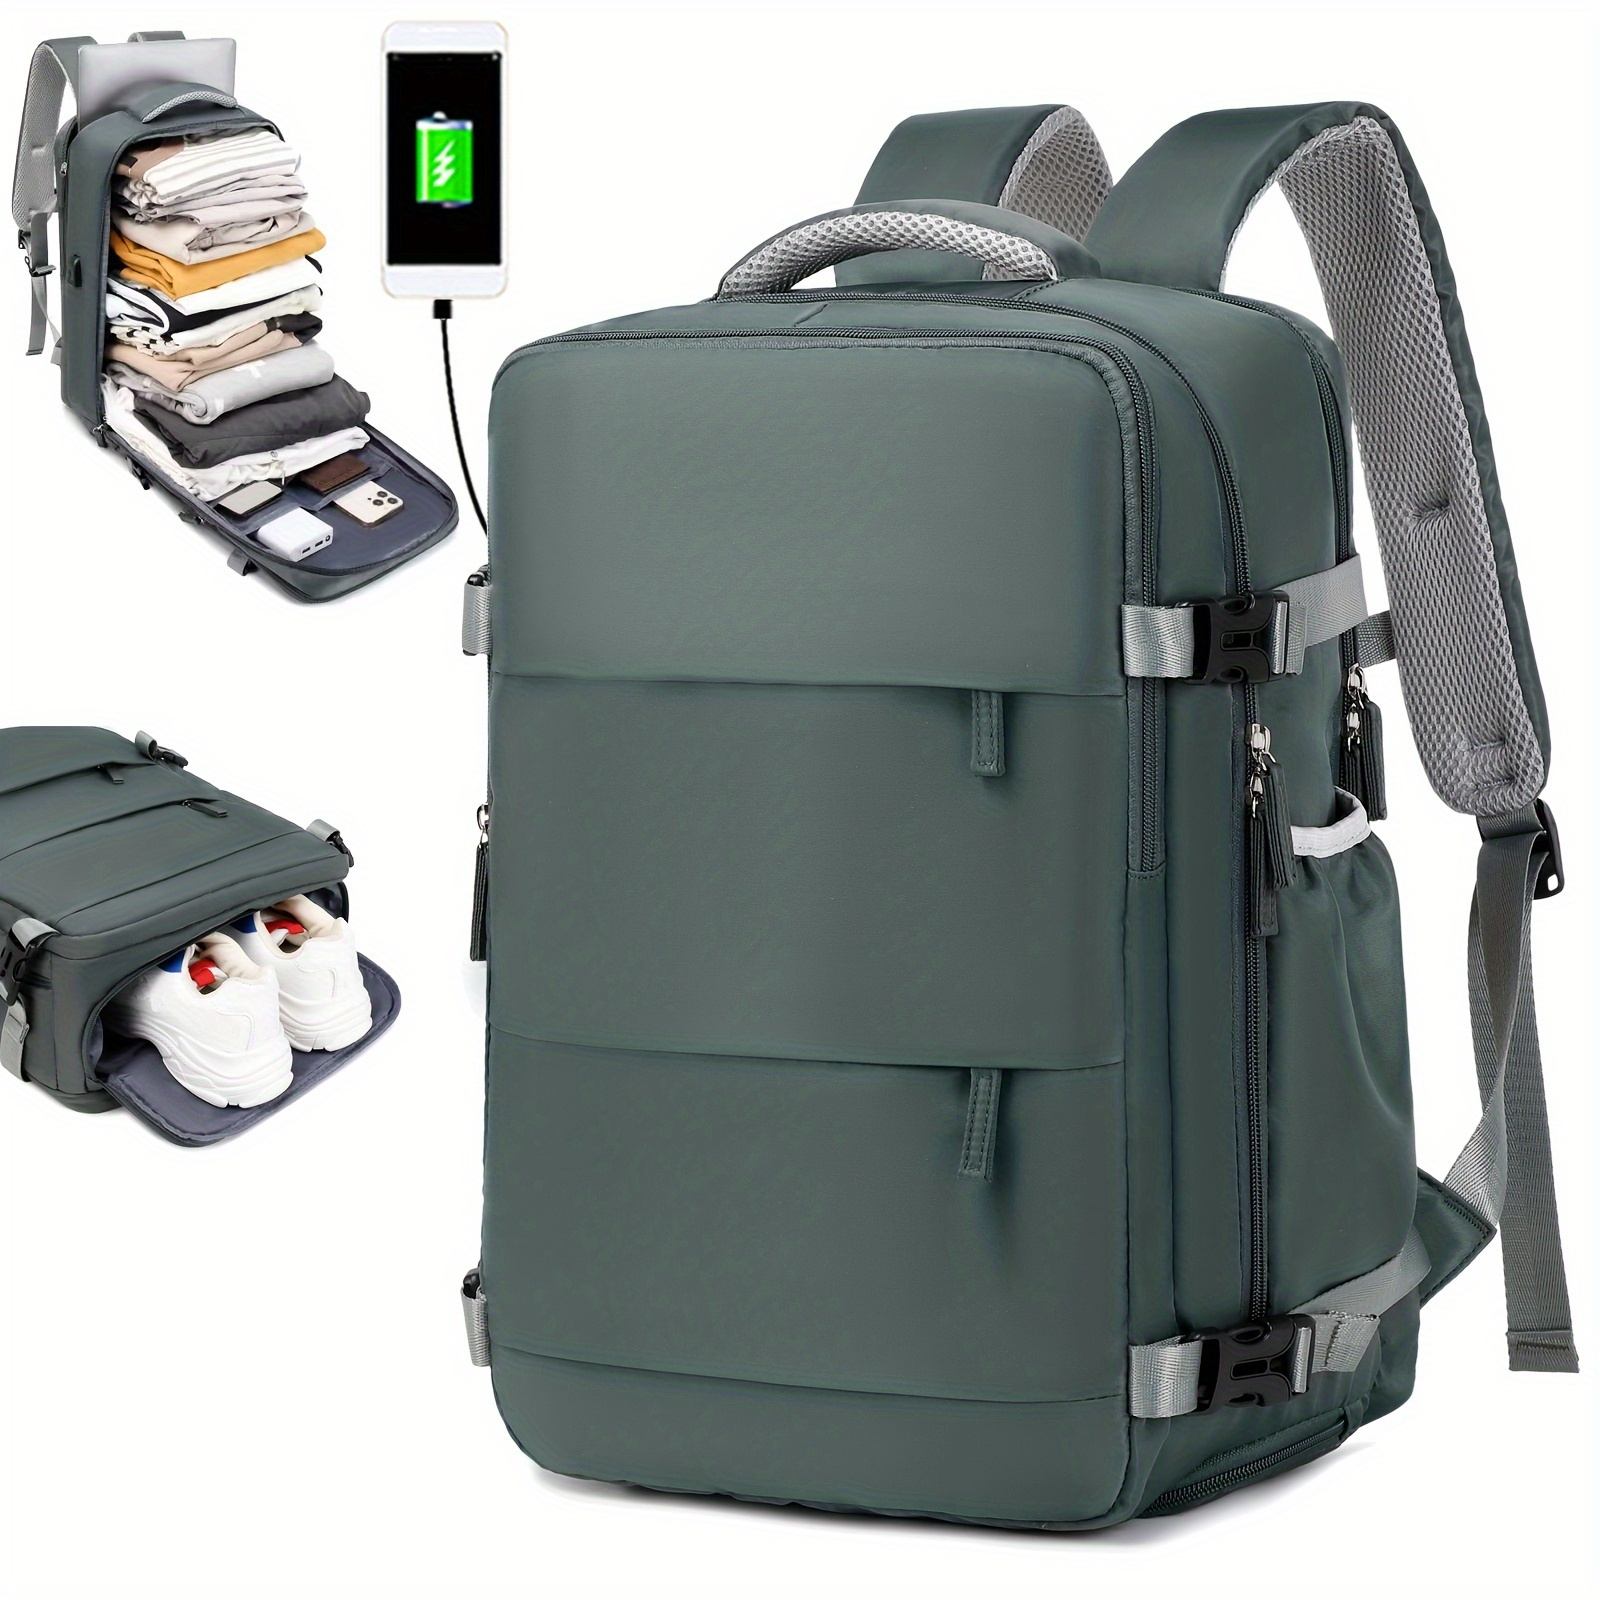 

Large Laptop Computer Backpack, Airline-approved Travel Rucksack, Outdoor Sport Hiking Schoolbag With Shoes Compartment